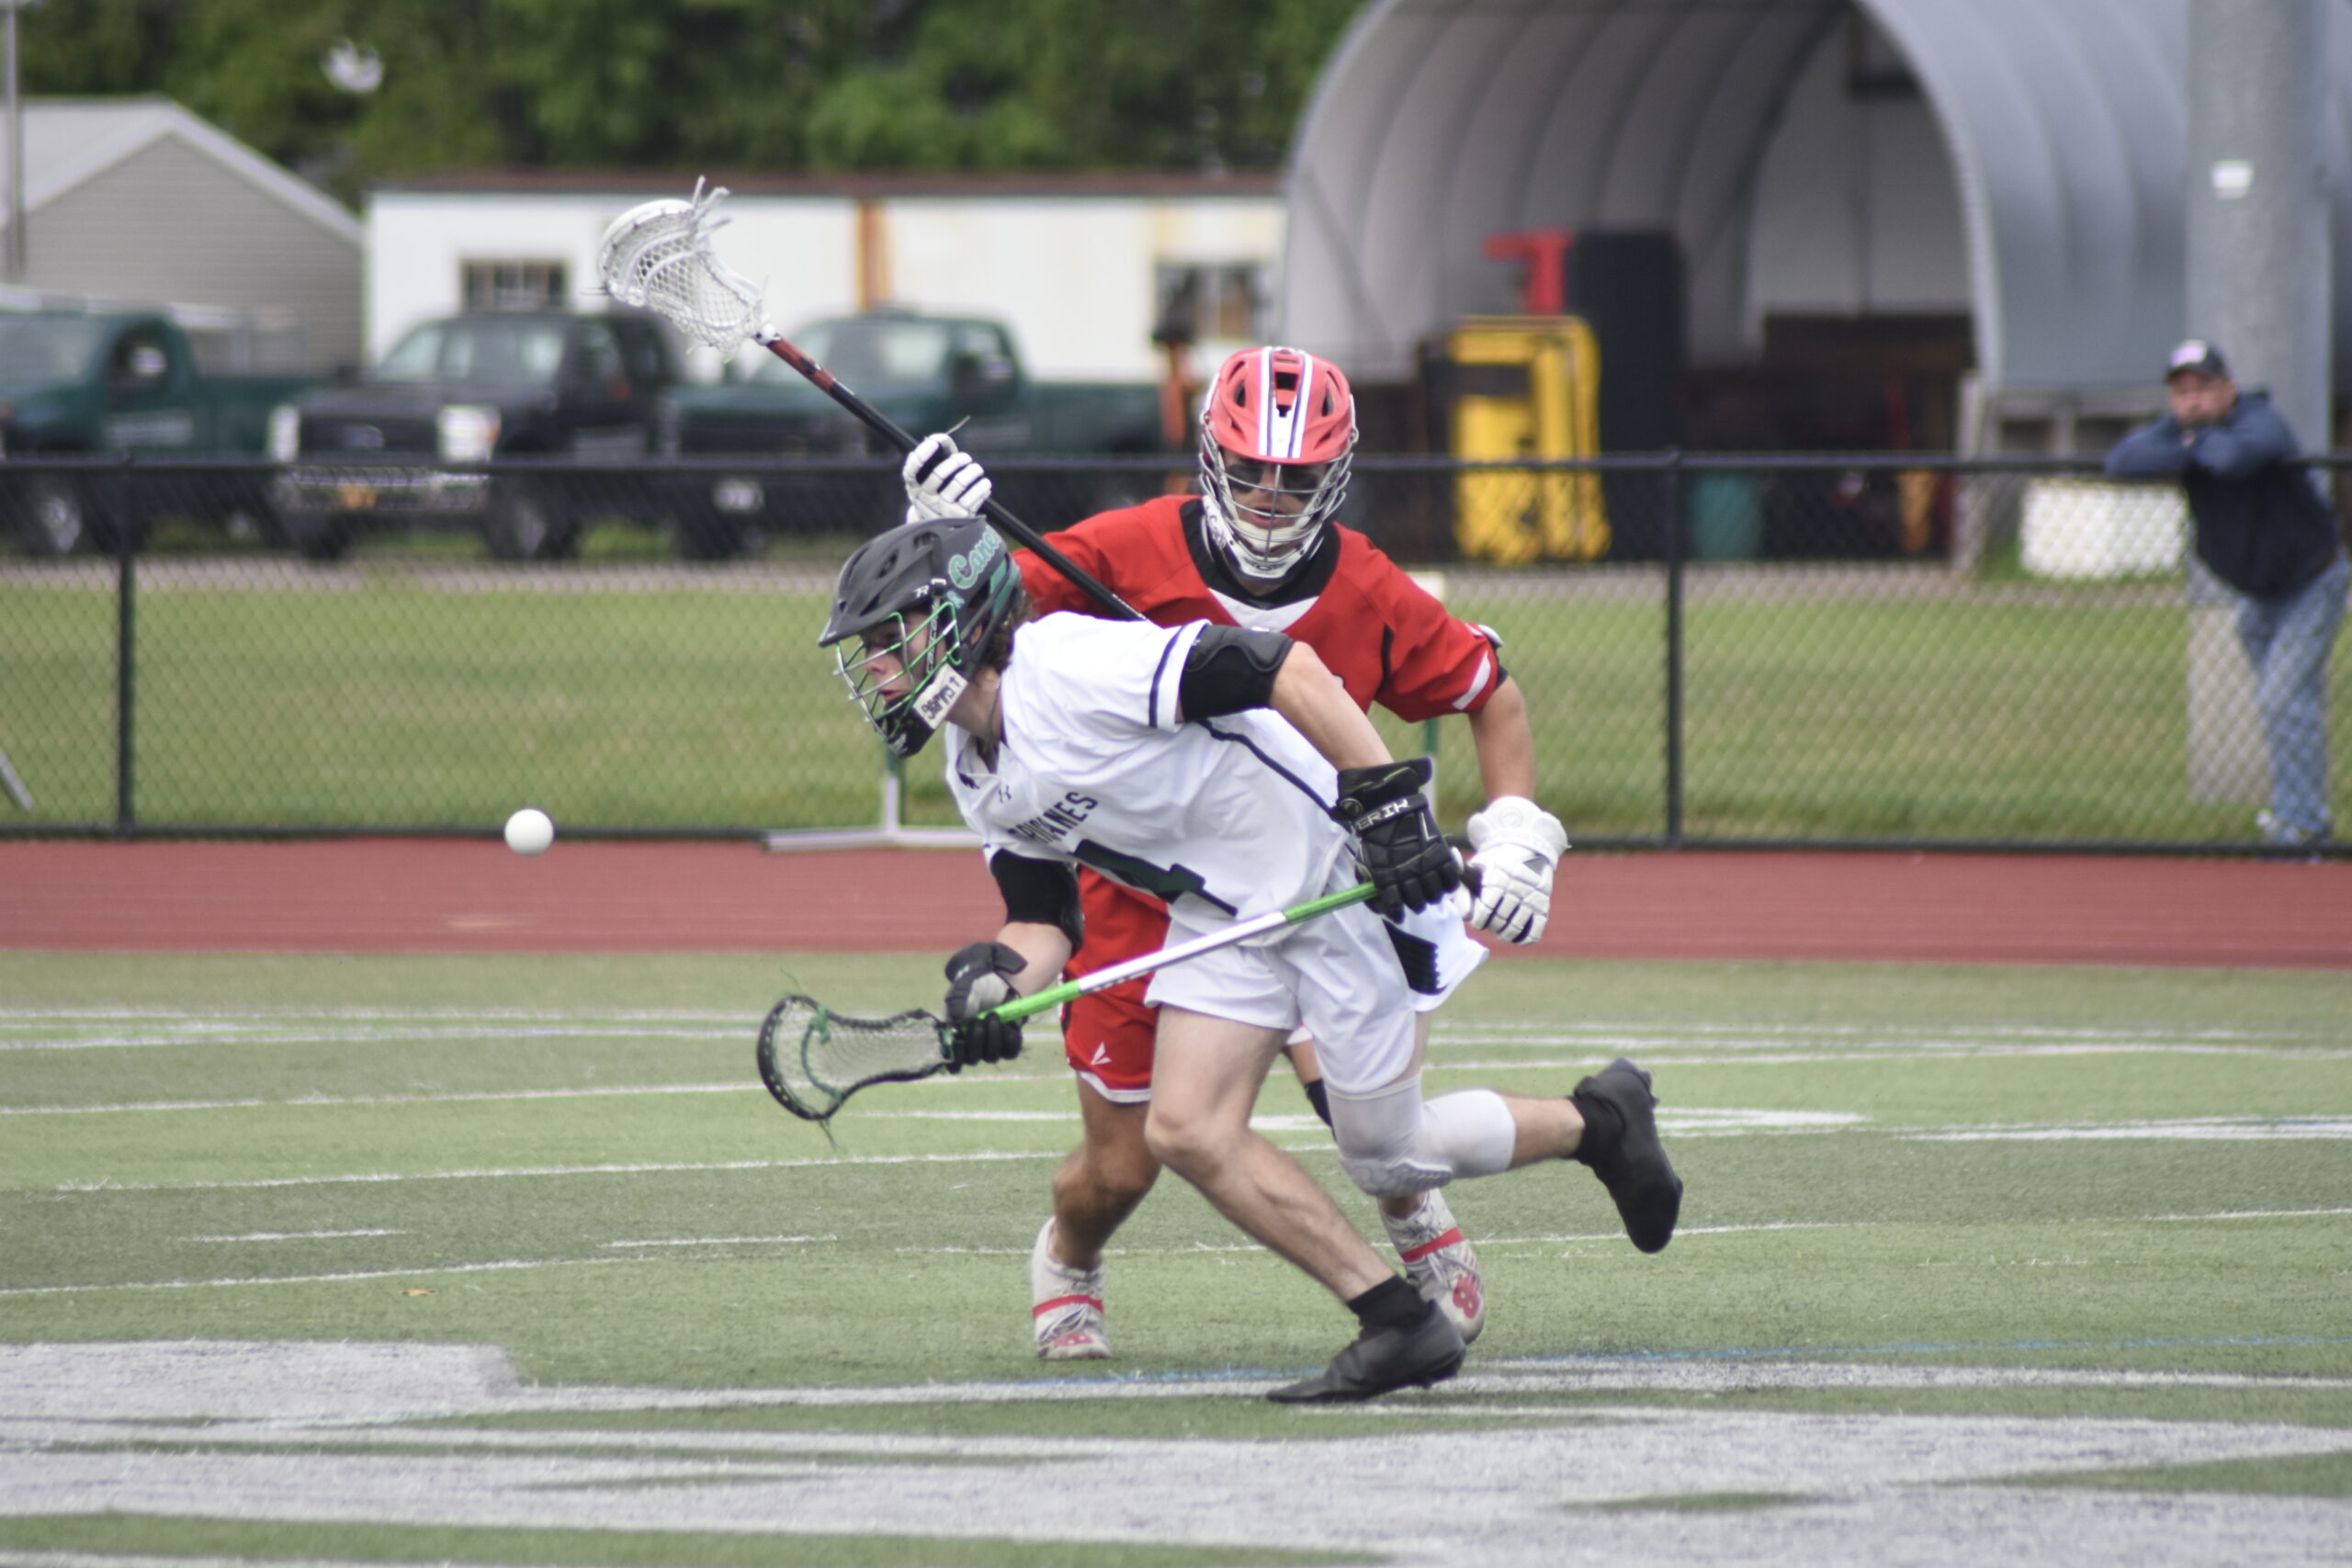 Westhampton Beach sophomore Nolan Michalowski chases after a loose ball off a draw.   DREW BUDD